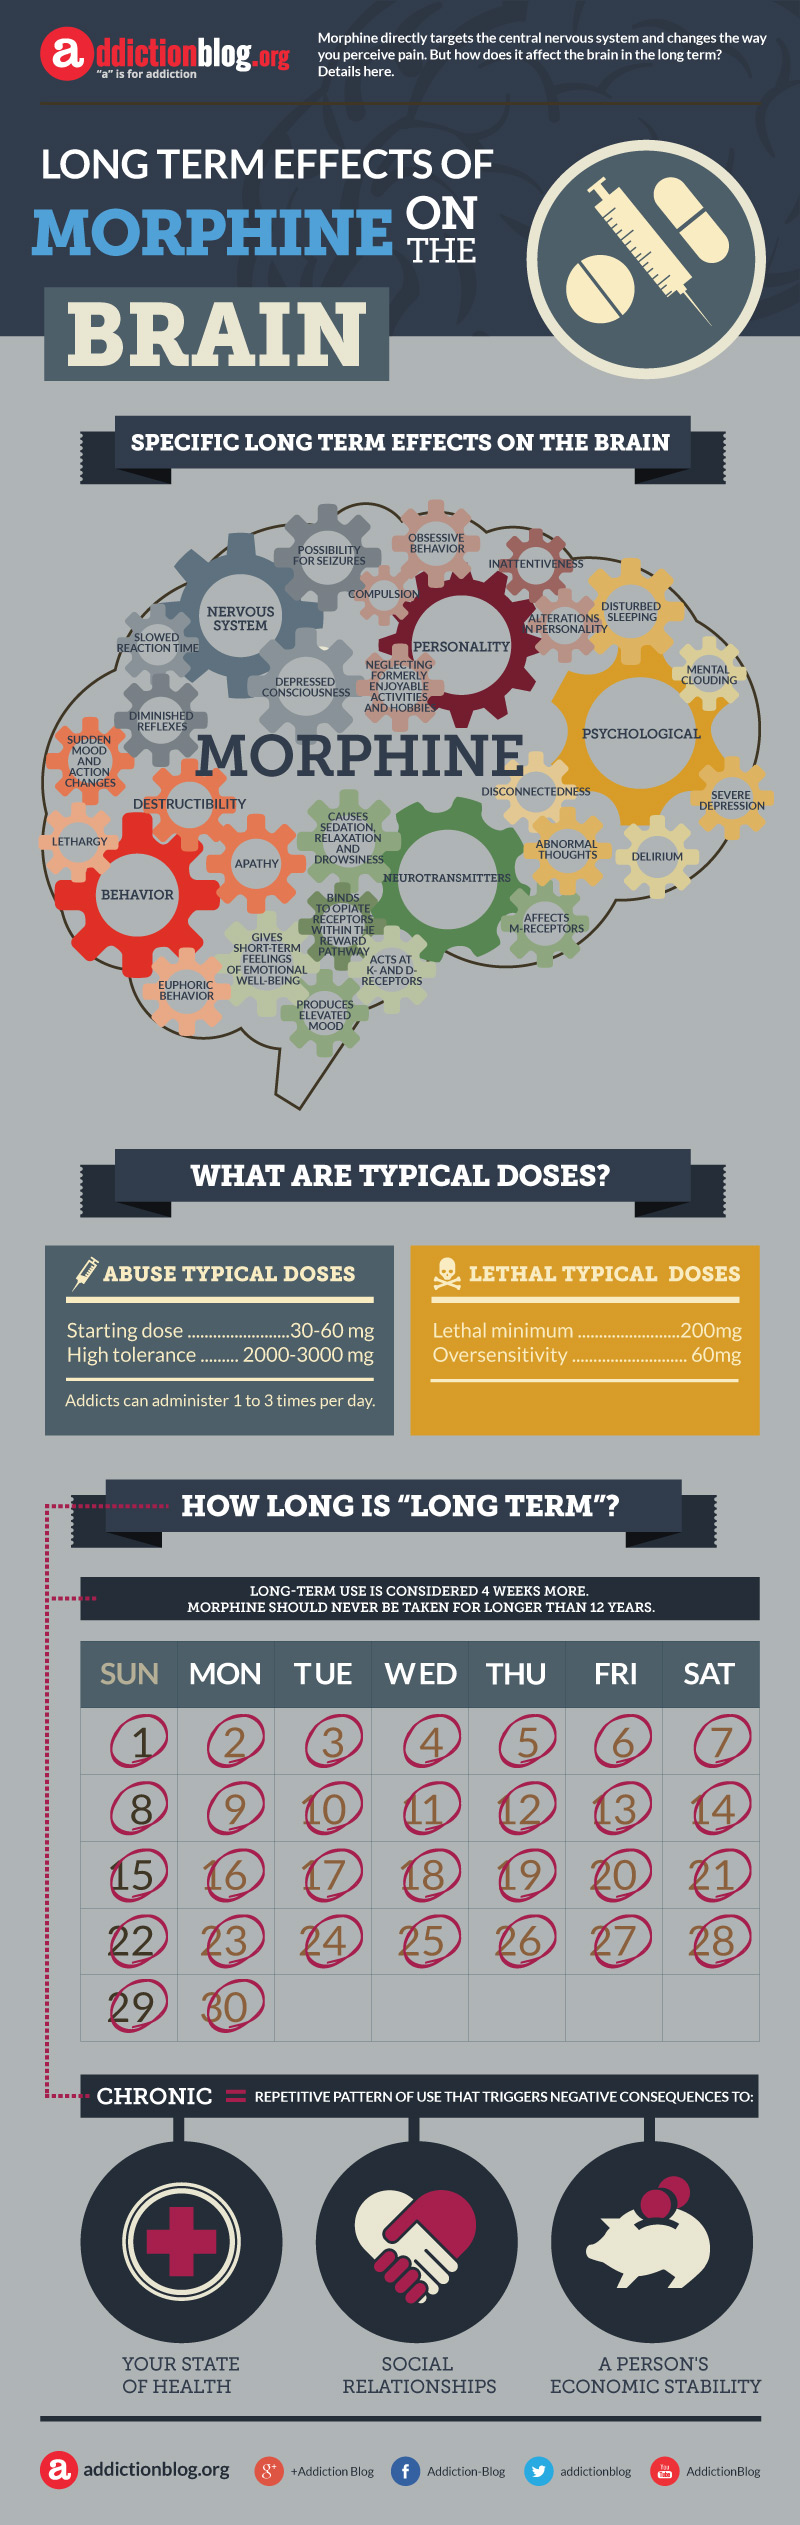 Long Term Effects of Morphine on the Brain (INFOGRAPHIC)